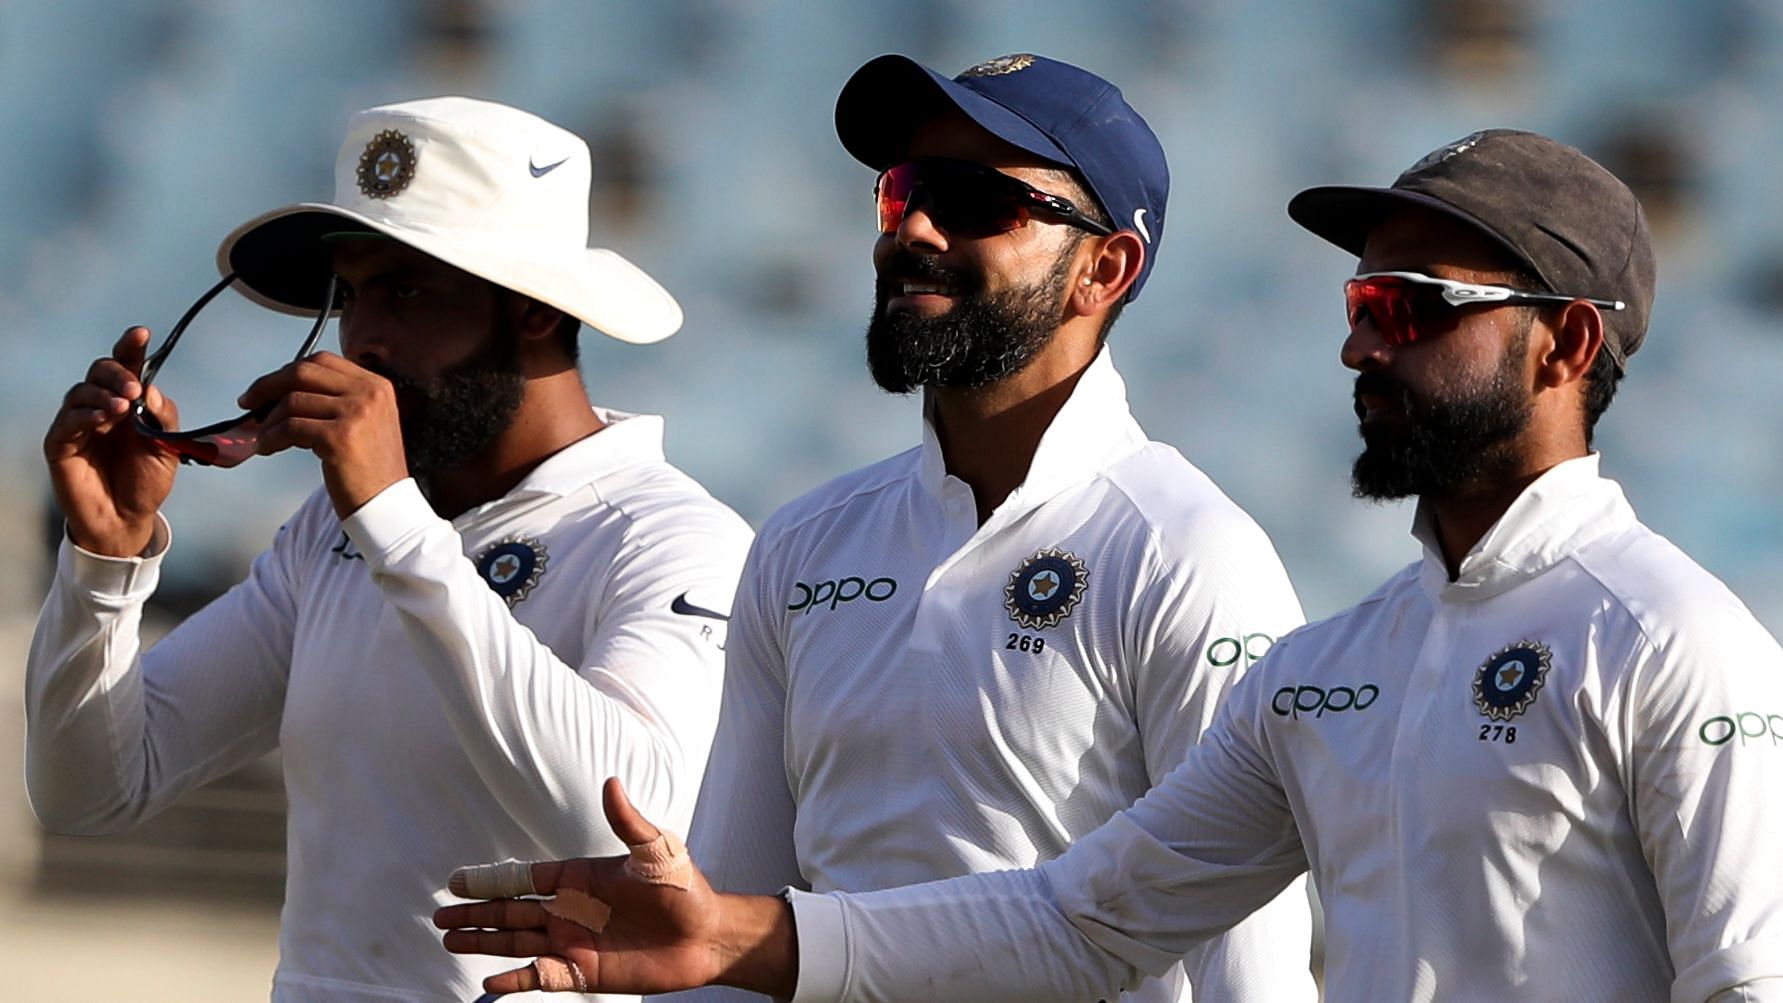 India vs South Africa Test Series’ Schedule, Date and Time: India play South Africa in three Test matches starting 2 October. 